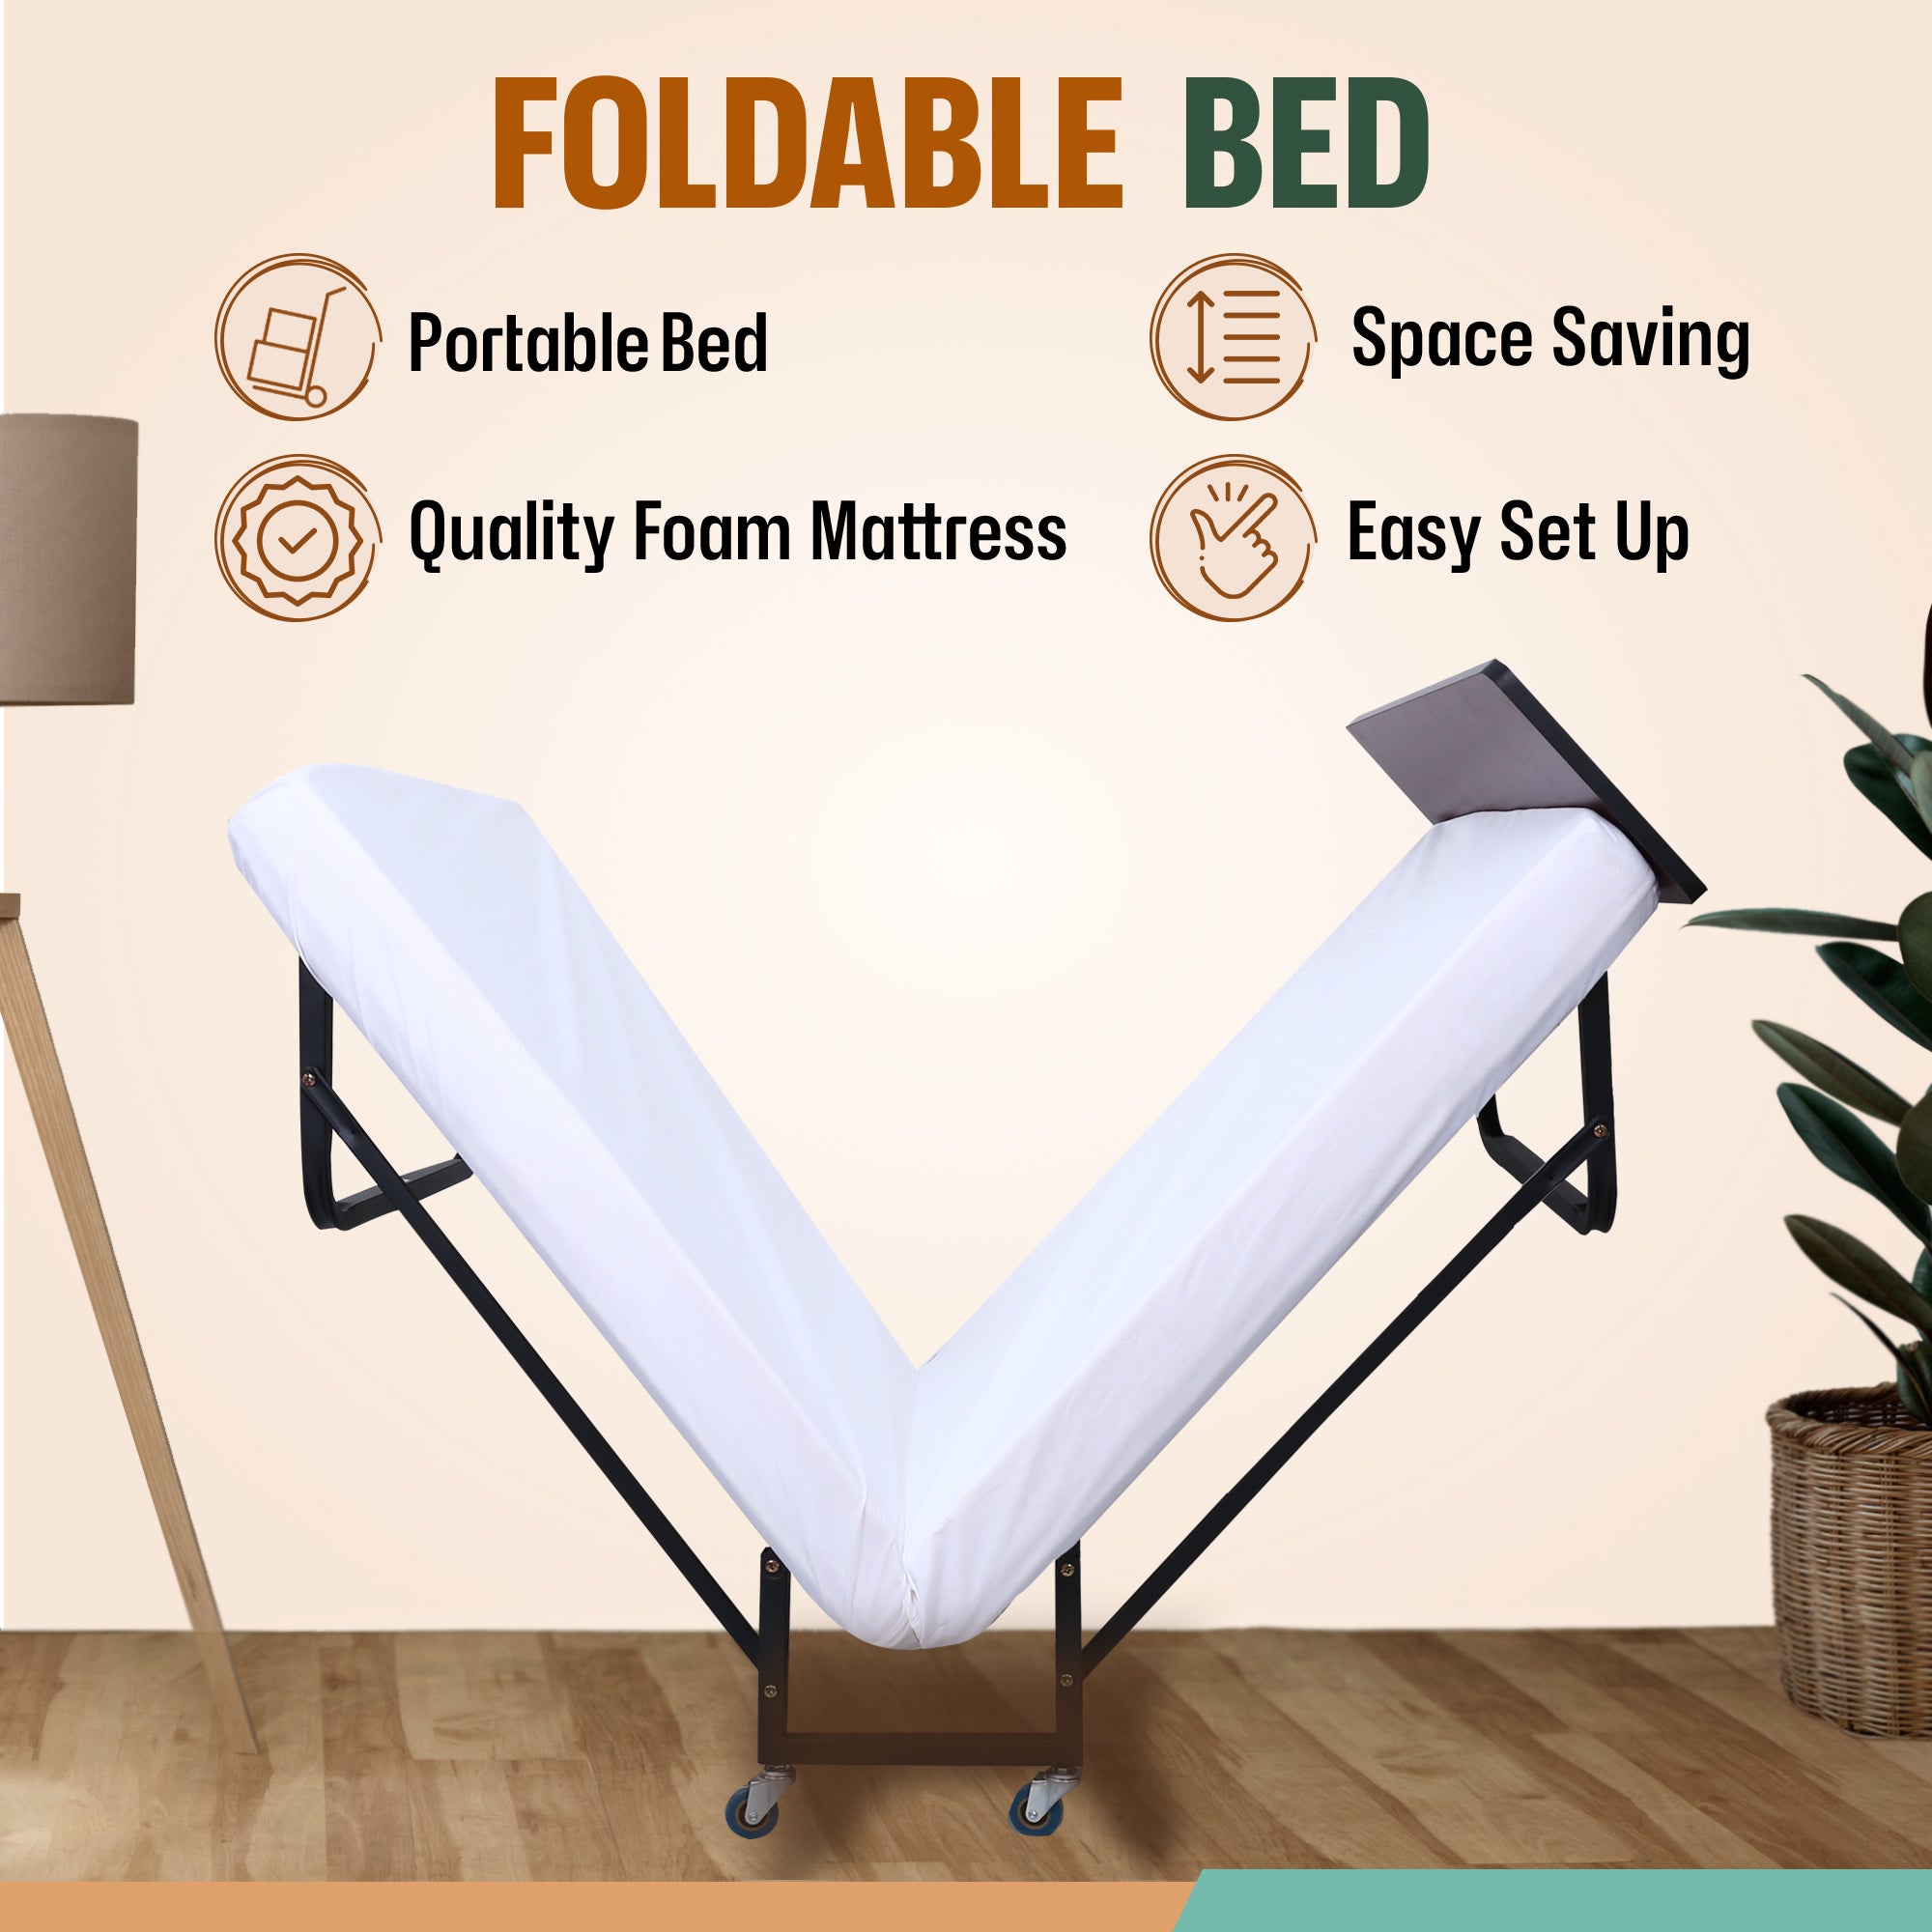 Premium Foldable Bed with Mattress and Mattress Protector Rollaway Portable Guest (only wheels and headboard requires assembly)